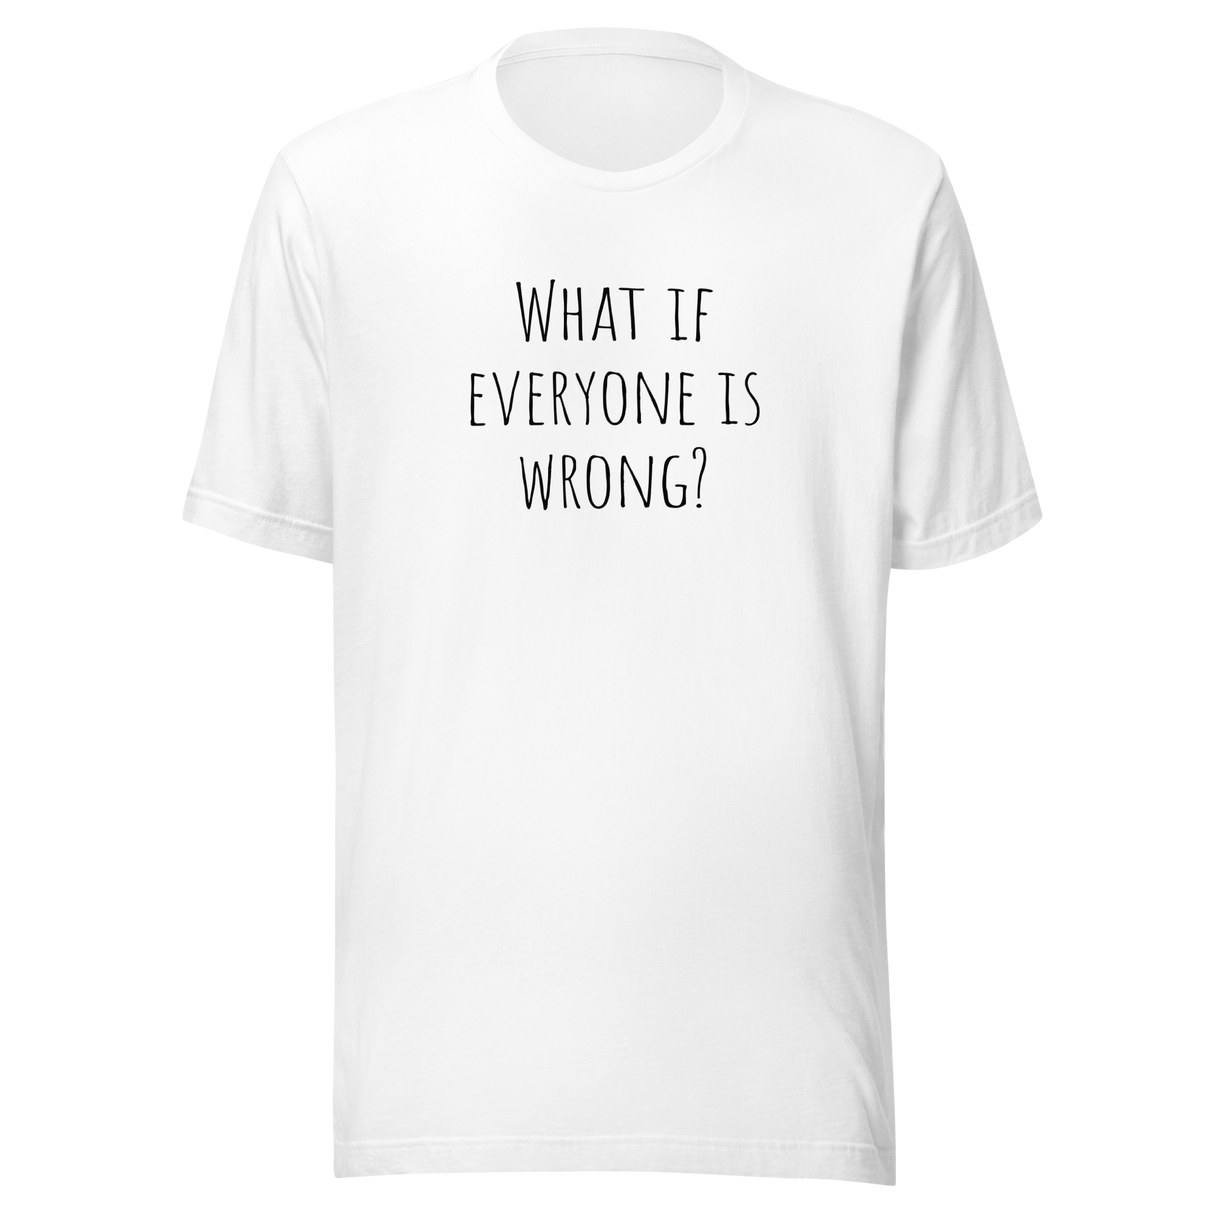 what-if-everyone-is-wrong-what-if-tee-everyone-t-shirt-wrong-tee-t-shirt-tee#color_white